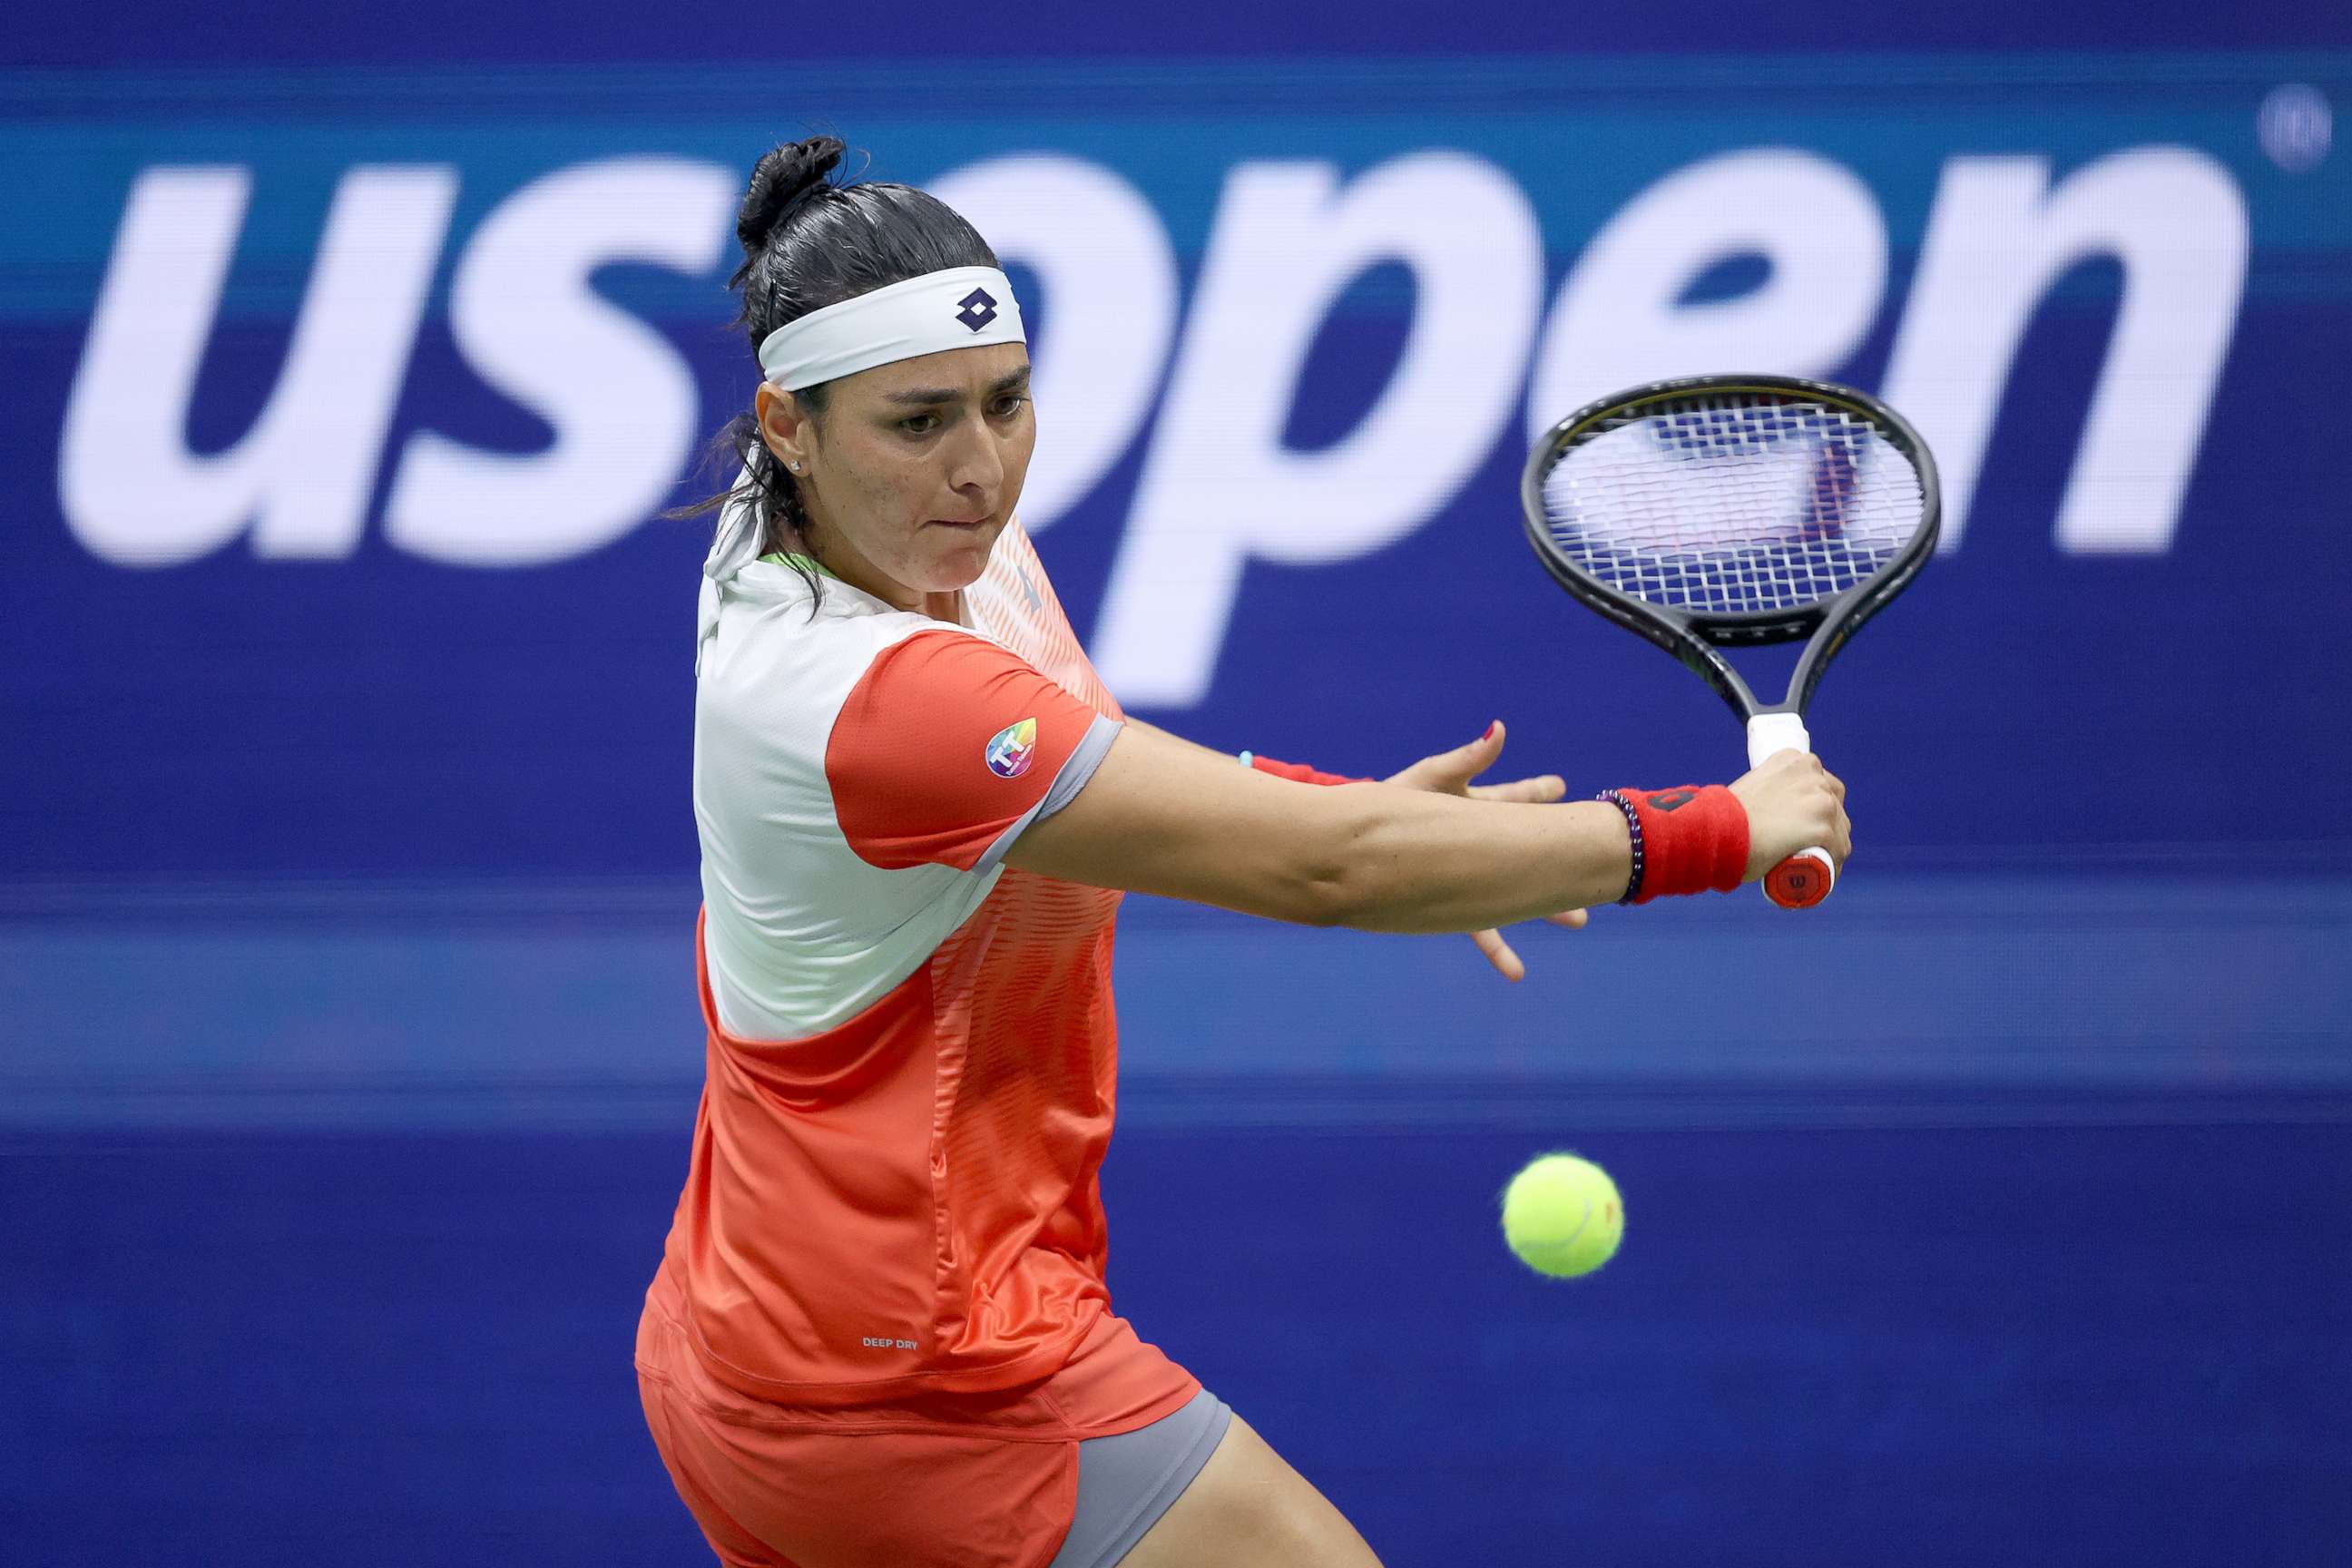 PHOTO: Ons Jabeur of Tunisia returns a shot against Ajla Tomlijanovic of Australia during their Women's Singles Quarterfinal match on Day Nine of the 2022 US Open at USTA Billie Jean King National Tennis Center on Sept. 6, 2022, in the Flushing, N.Y.